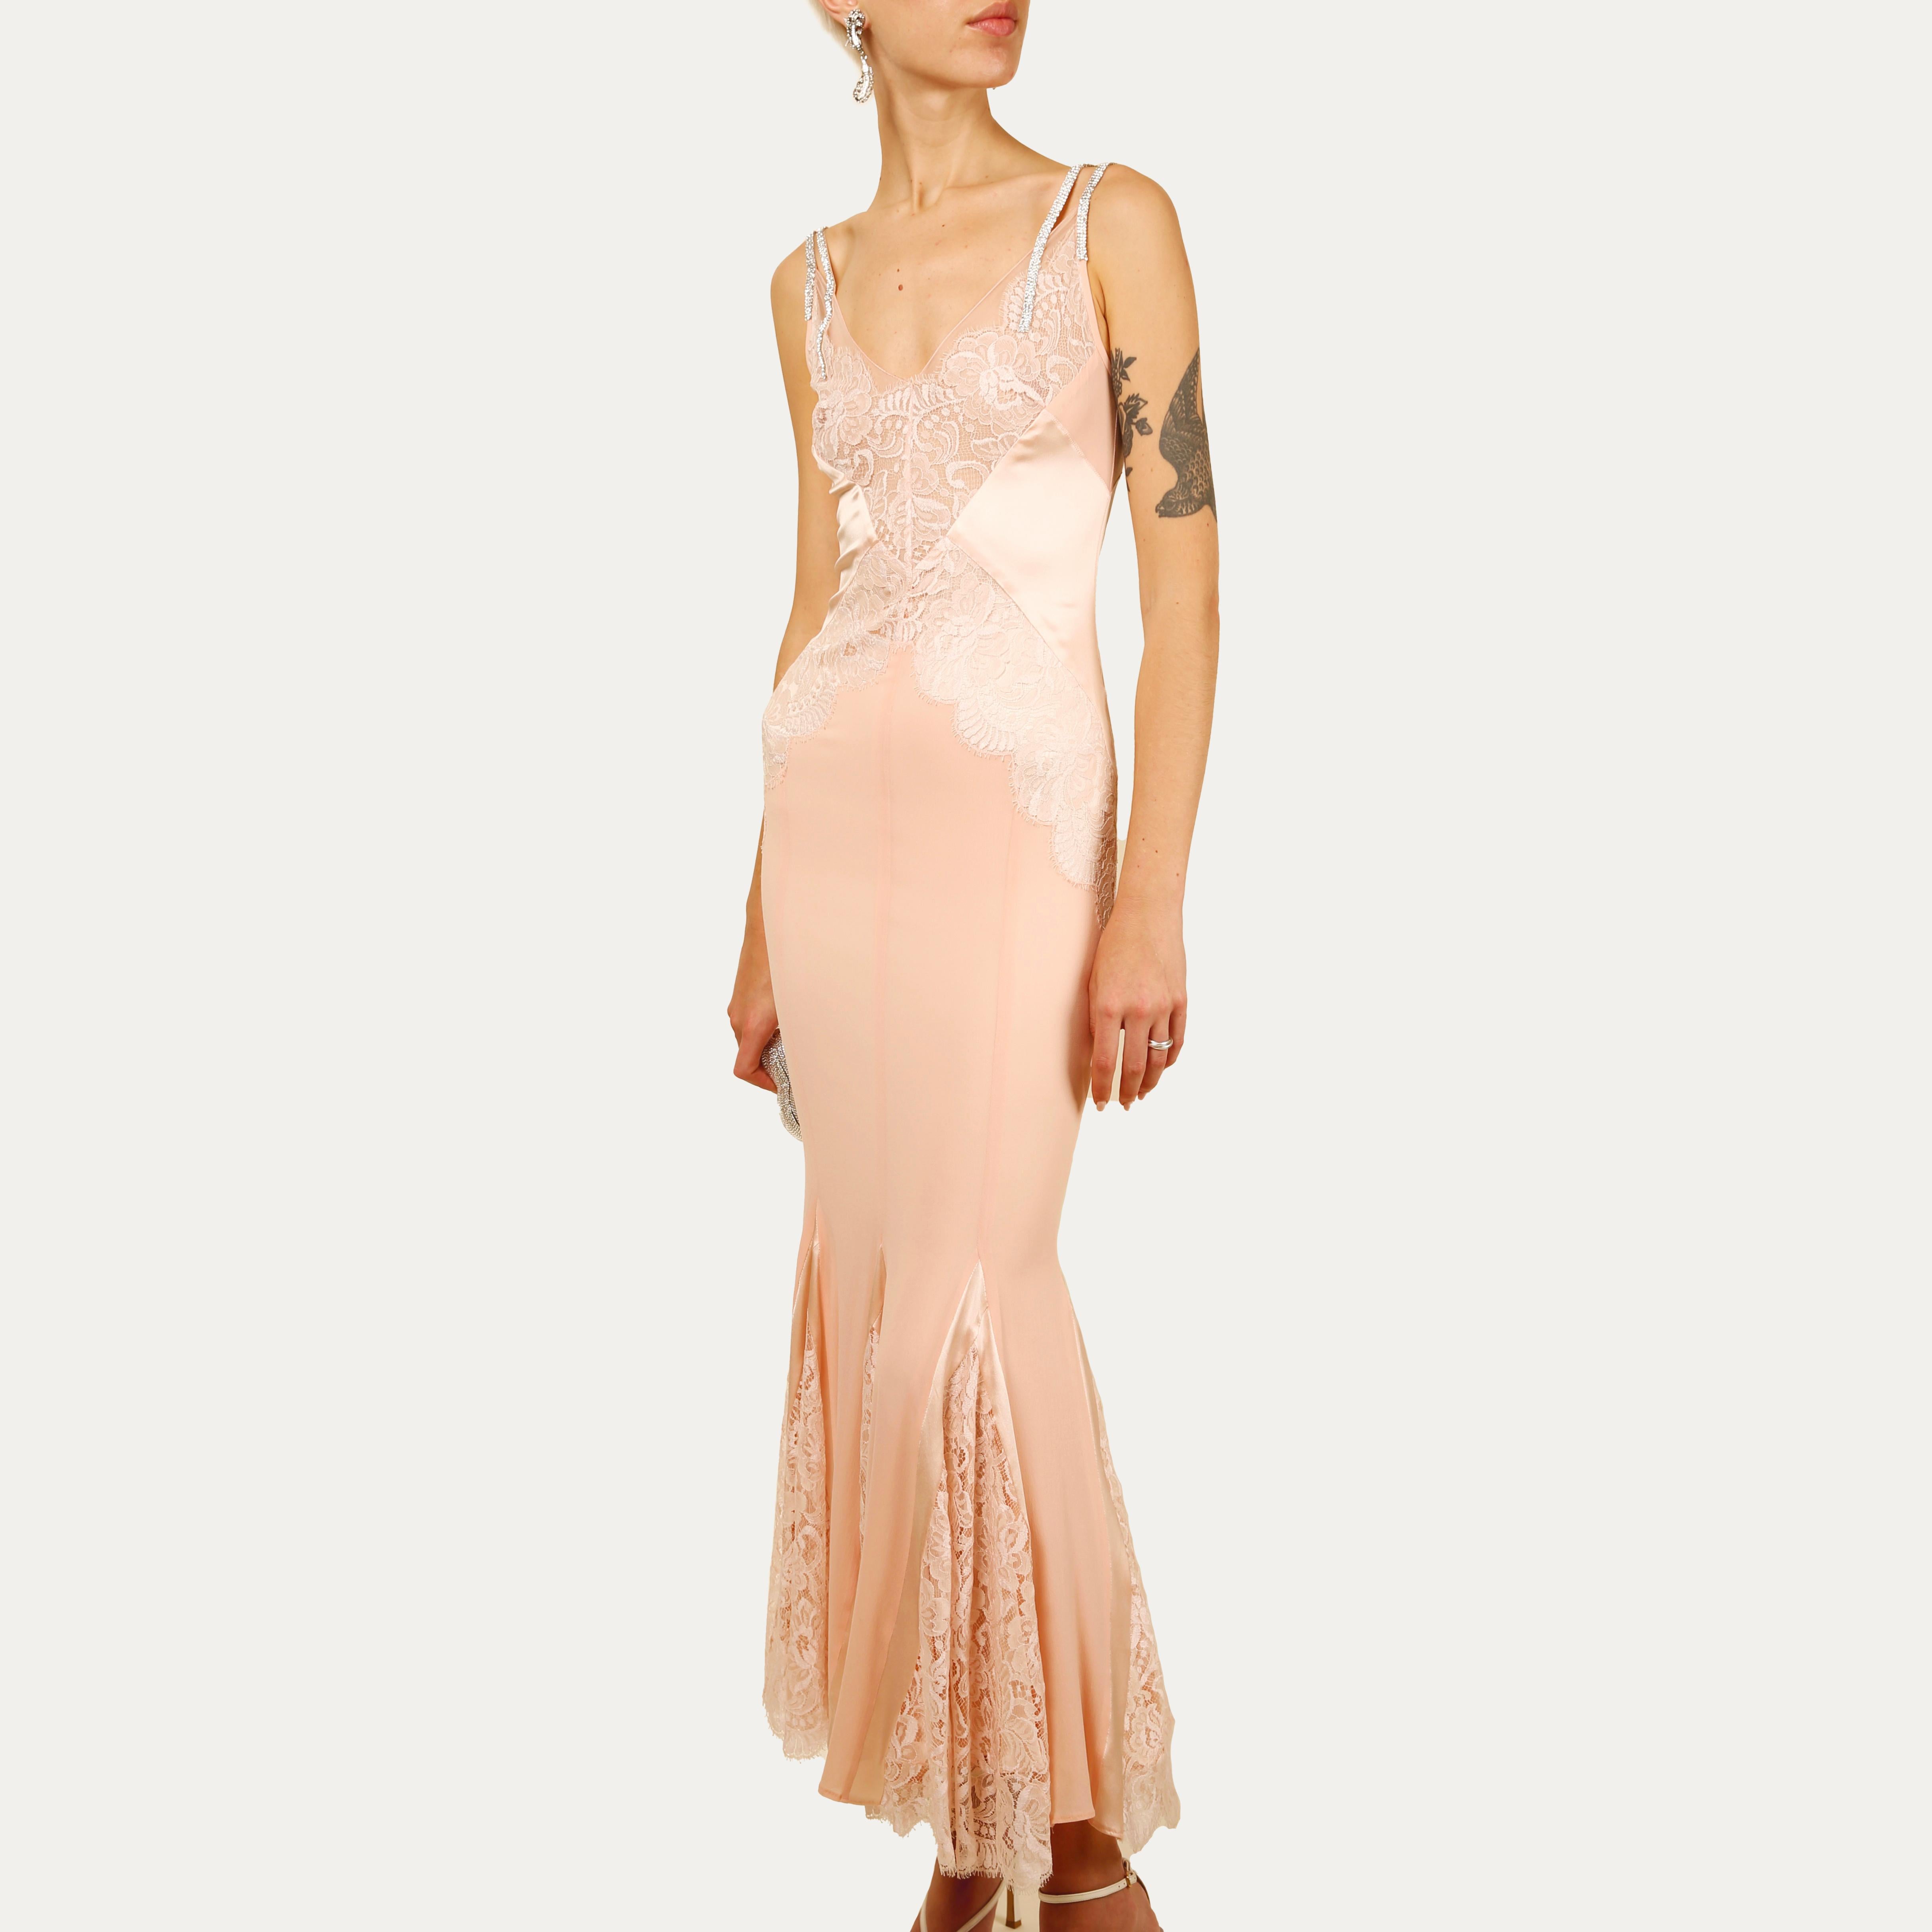 An Incredibly rare floor length gown from Dolce & Gabbana's Fall 2004 collection
Pink silk and lace cut out sheer dress with double crystal straps
Concealed back zip

Size:
IT 42. This dress has plenty of stretch so will fit various sizes, please